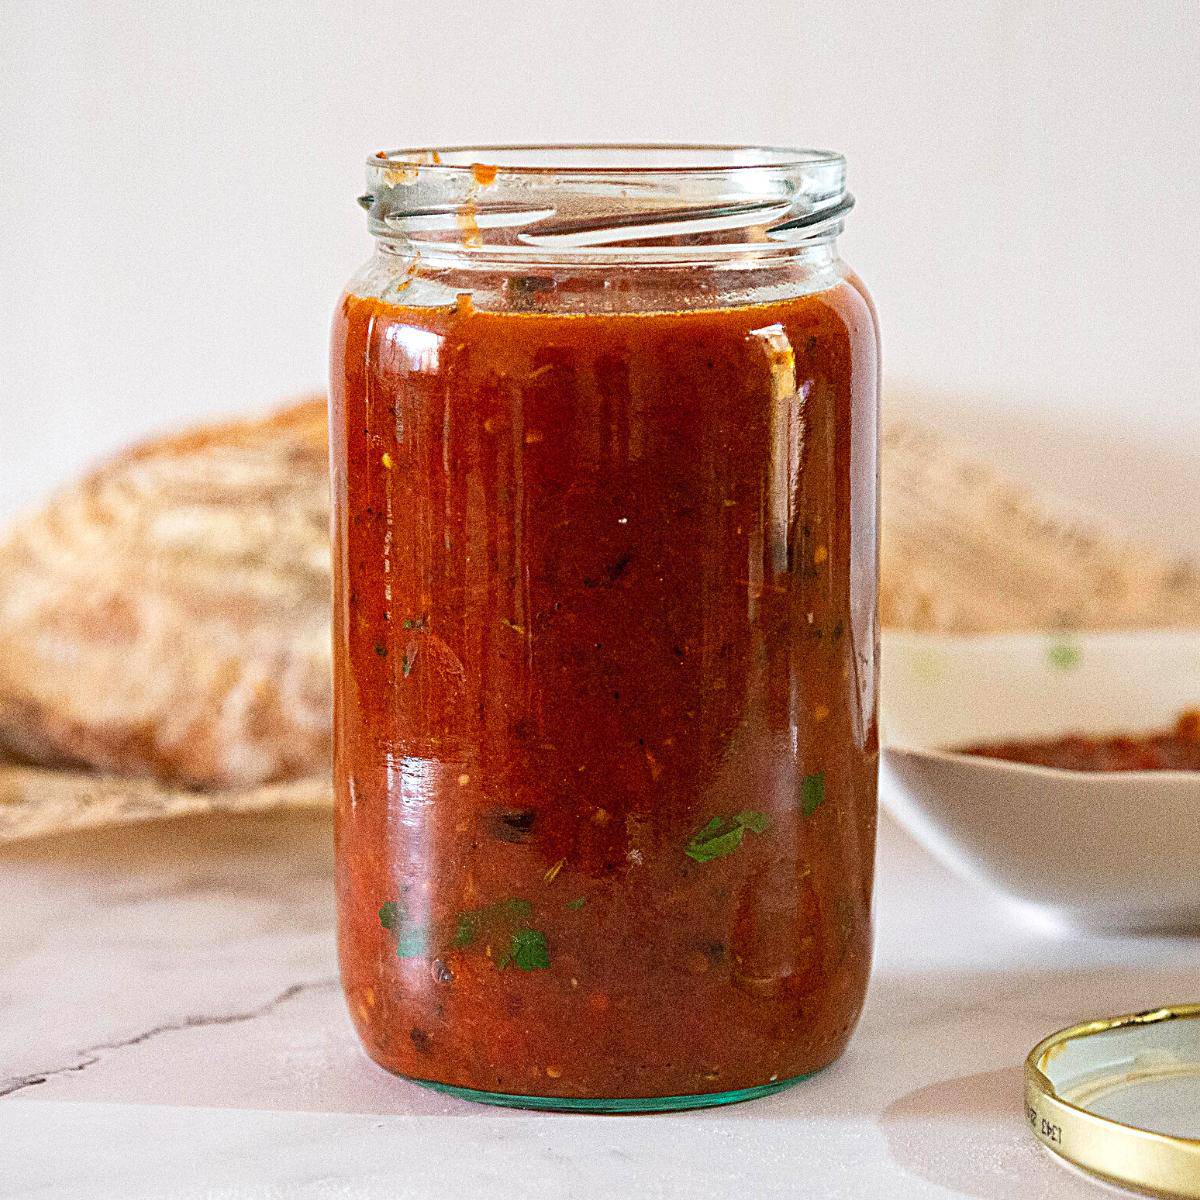 A jar with roasted tomato sauce.